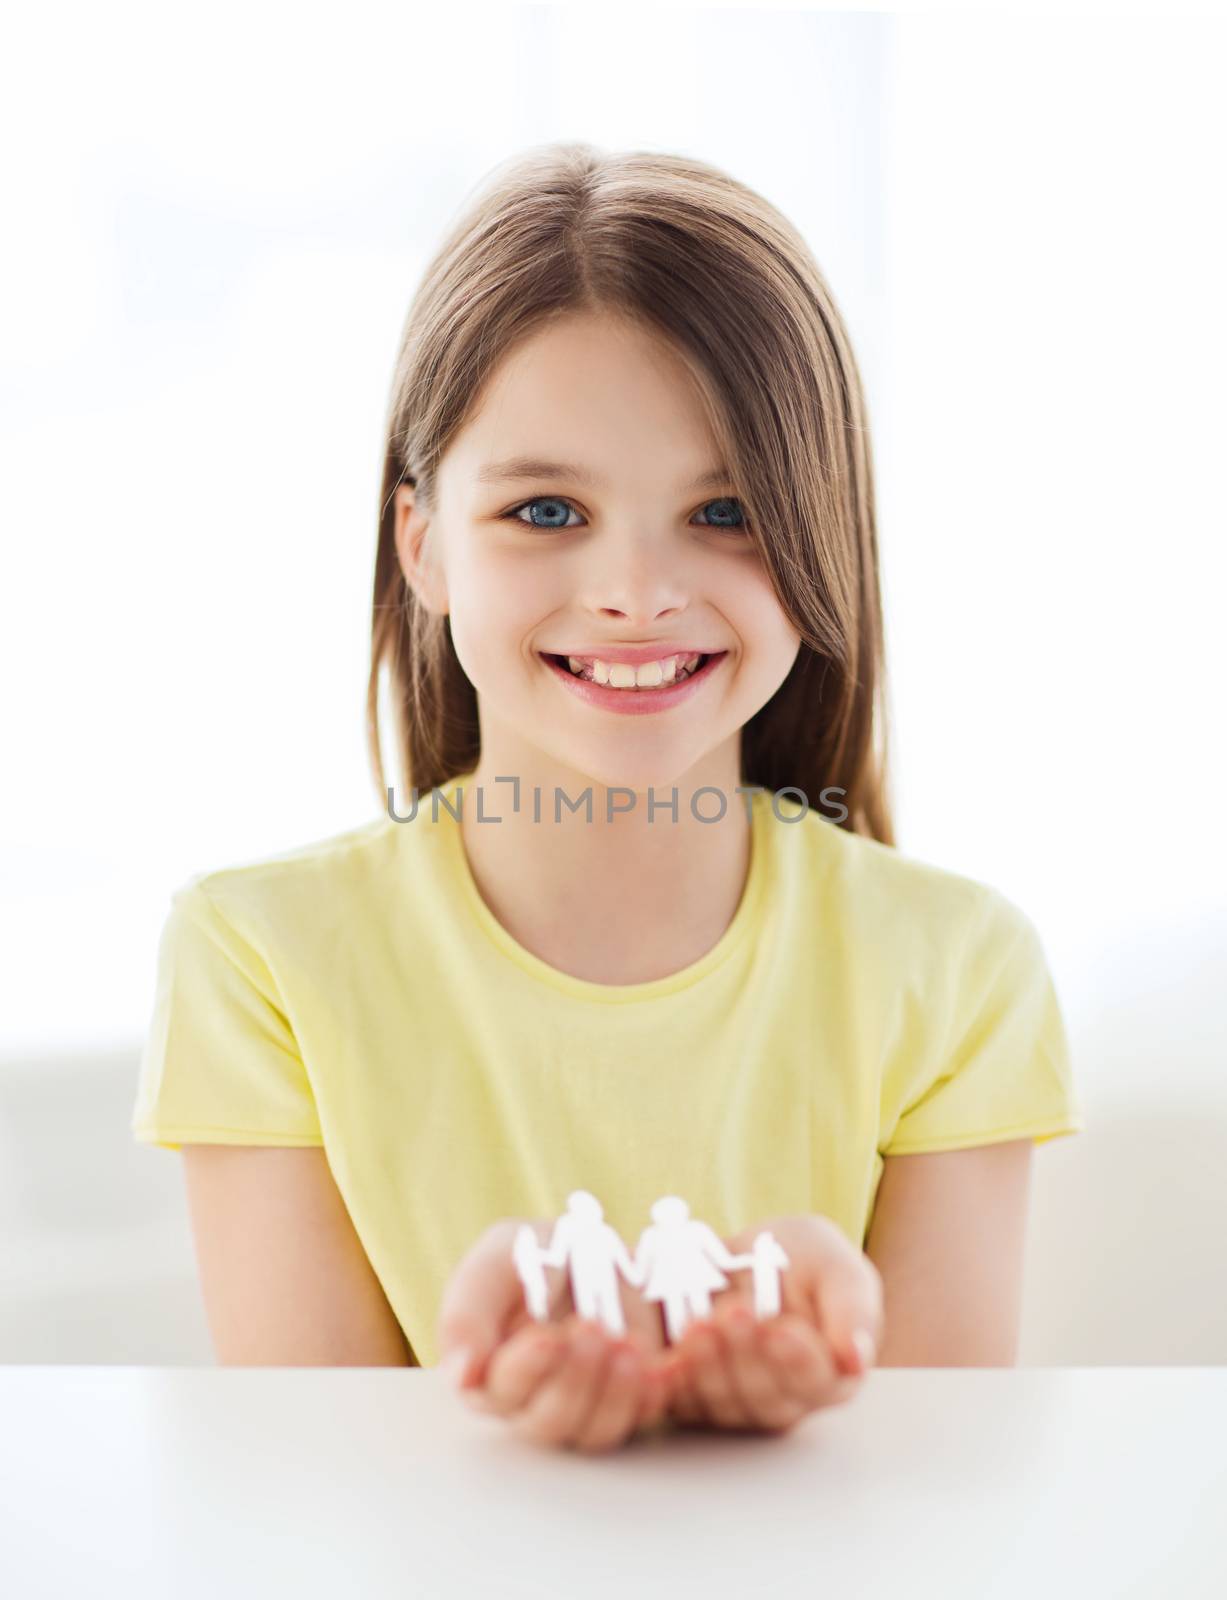 family, childhood, home and happiness concept - smiling little girl showing paper man family